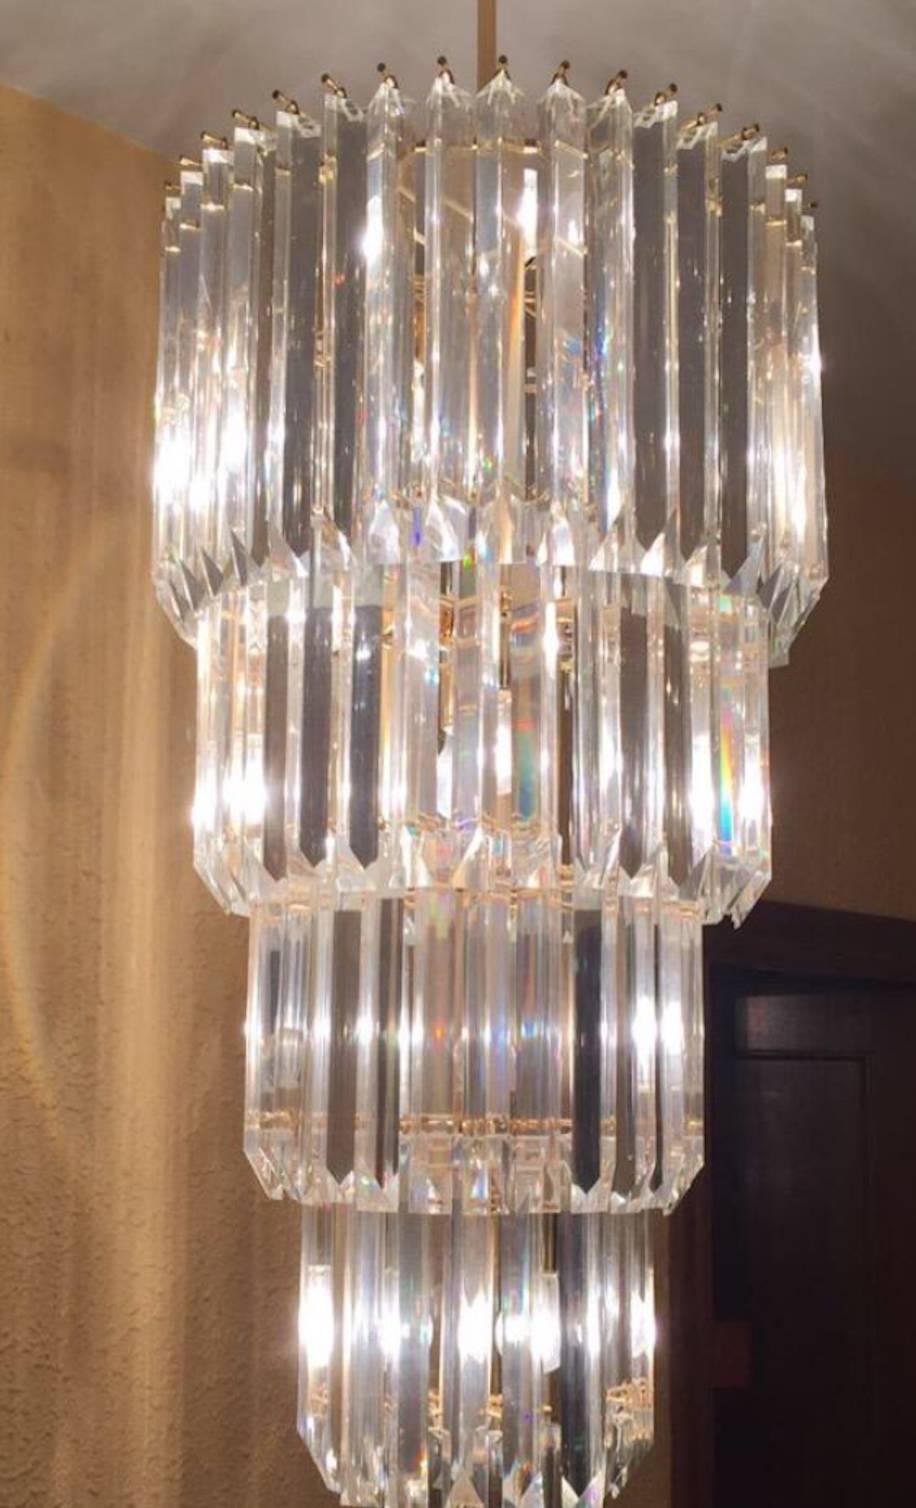 Tiers of Italian Murano triangle glass crystals Cascade in a downward in this stunning chandelier by revered manufacturer, Venini. Fixture has 12 candelabra sockets and is wired and ready to install.
A real stunning ORIGINAL vintage period lamp !!